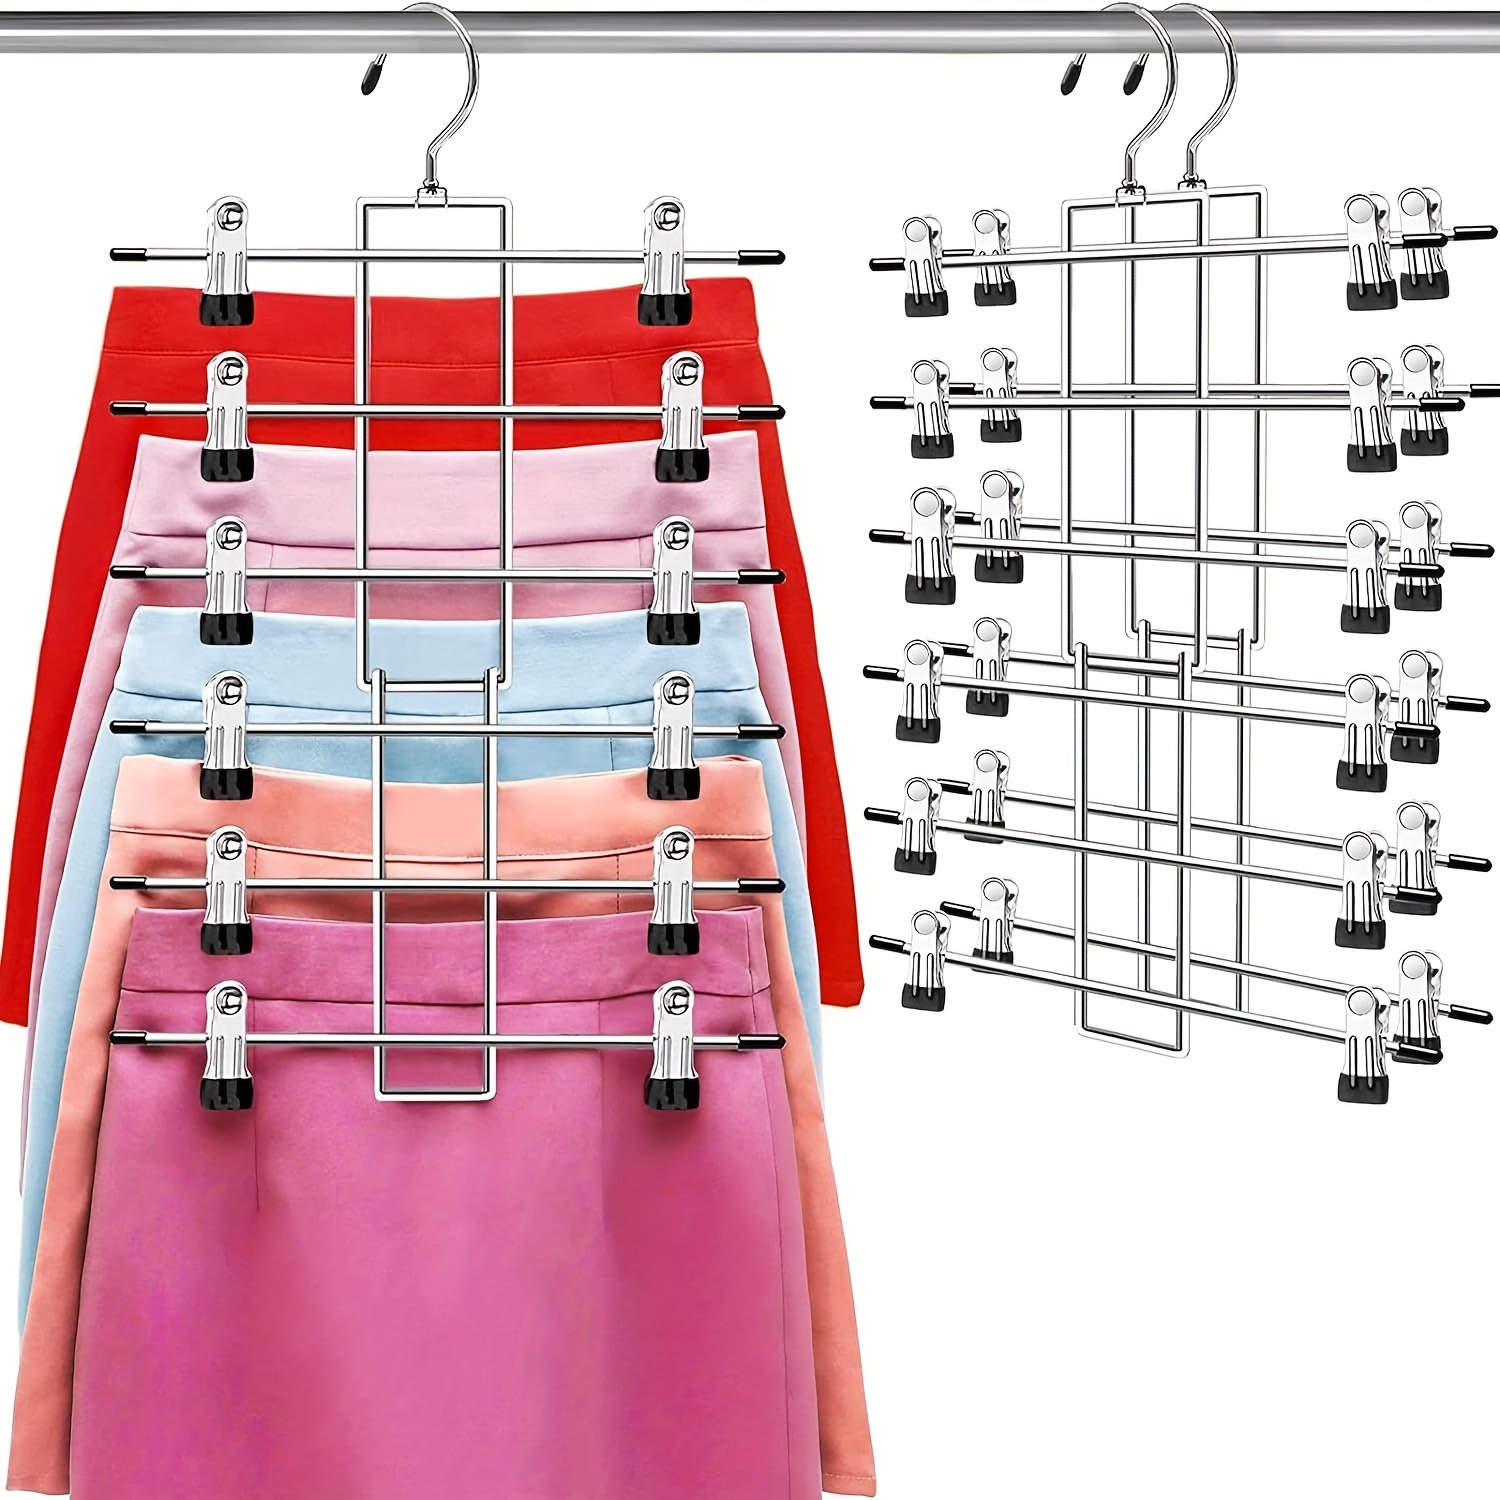 

1/2pcs Skirt Drying Hangers With Multi-layer, Pants Storage Rack For Skirts, Bras, Scarves, Underwear, Clothes Organizer For Closet, Wardrobe, Bedroom, Balcony, Dorm, Back To College Essential